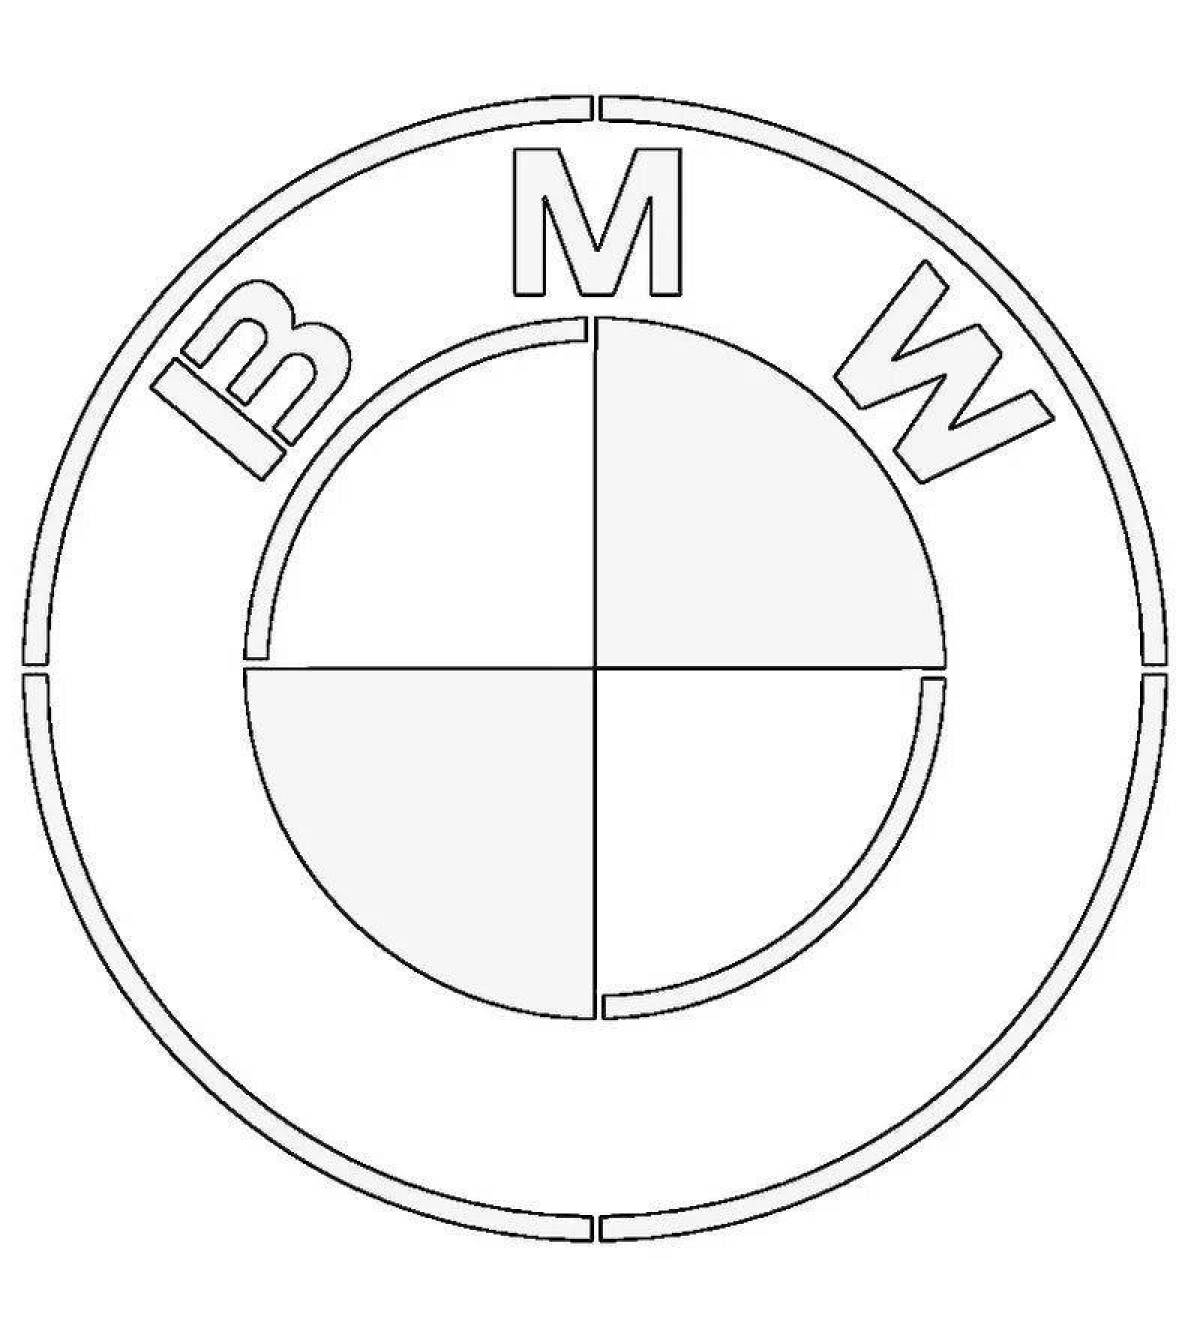 Mystery bmw icon coloring page